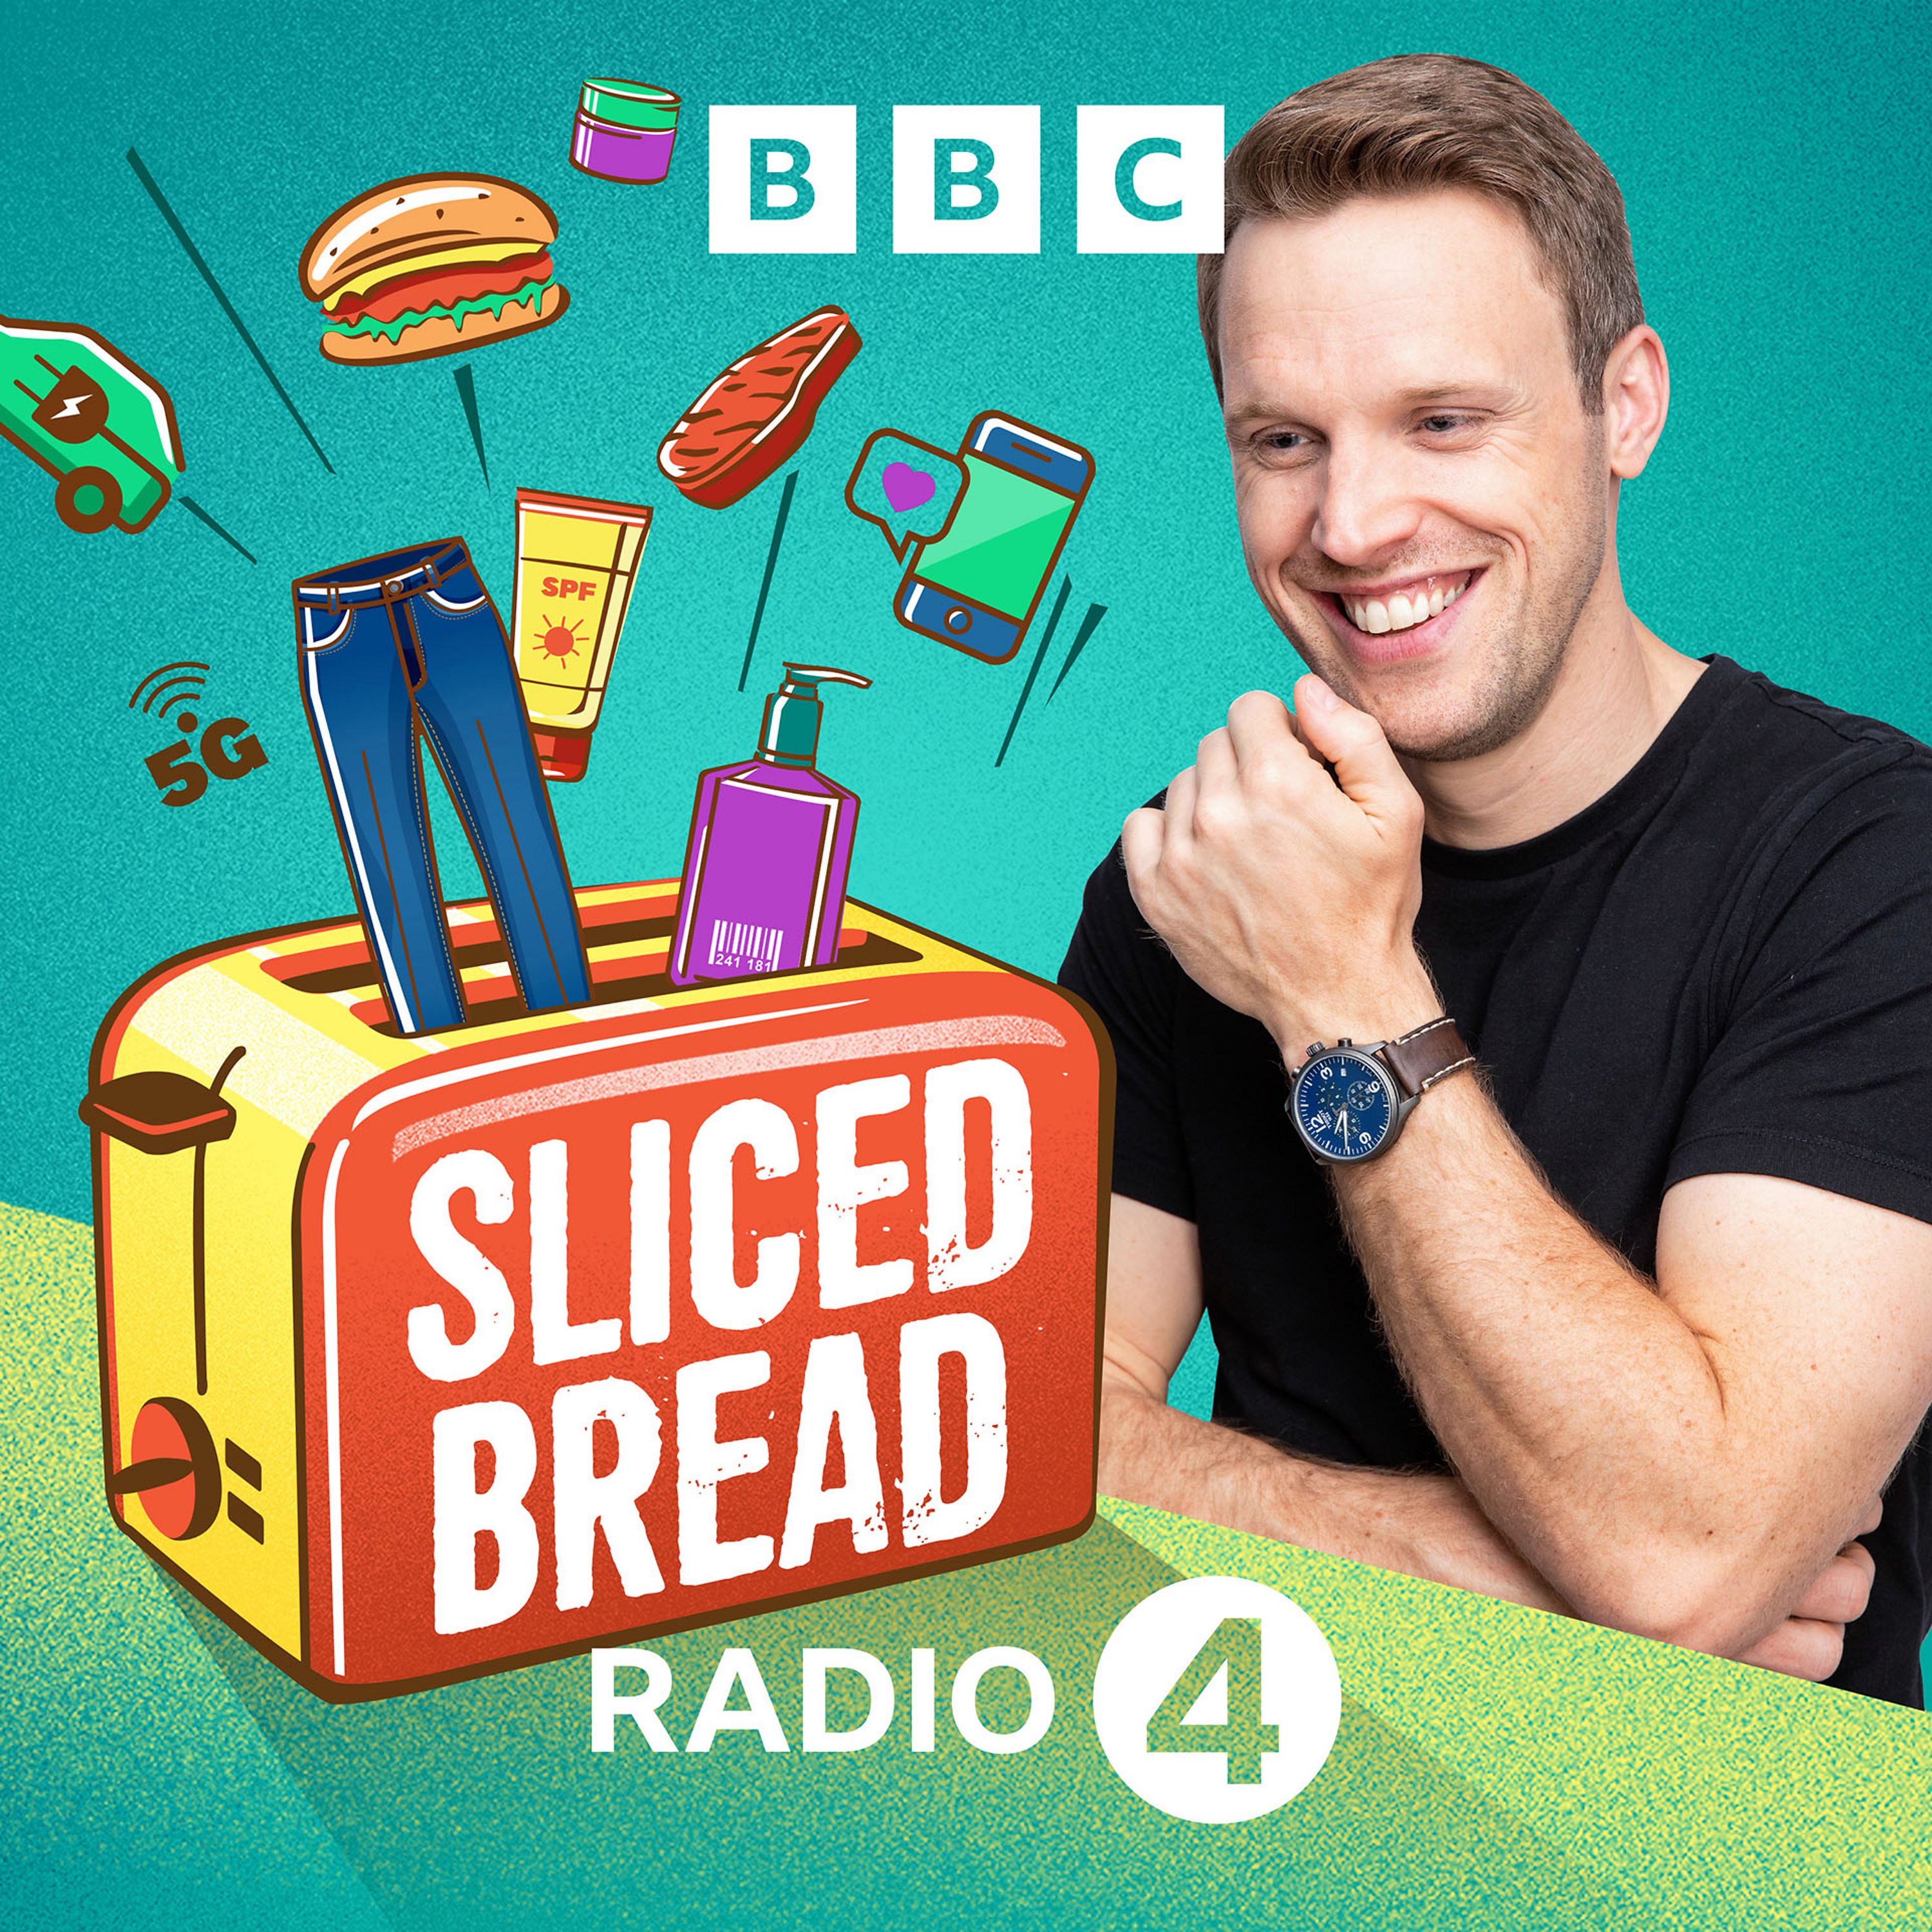 Sliced Bread is back!